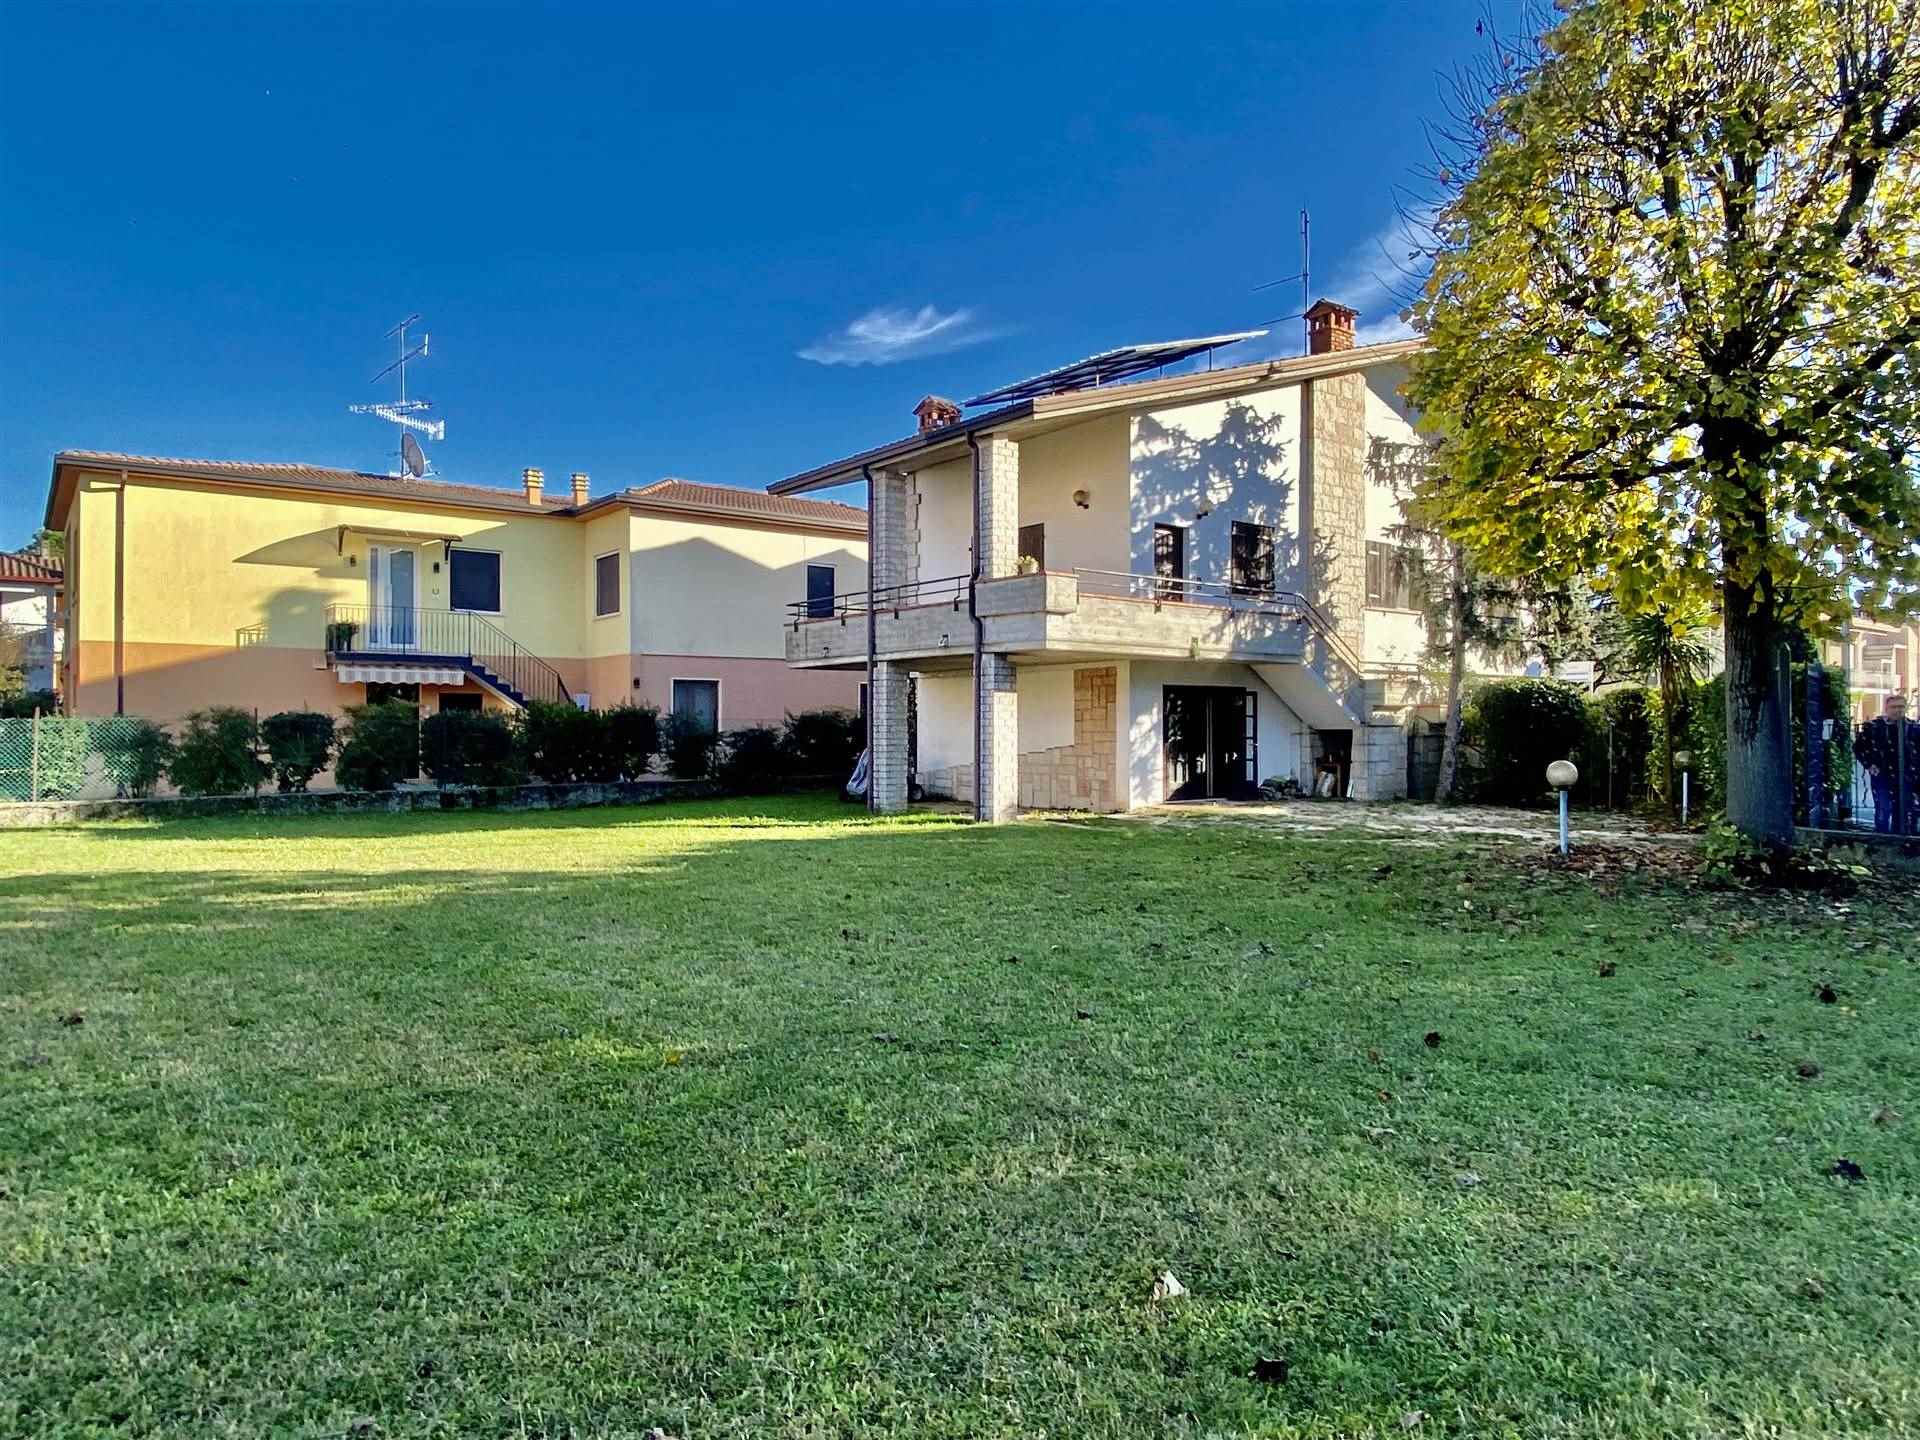 LUGANA, SIRMIONE, Villa for sale of 250 Sq. mt., Good condition, Heating Individual heating system, composed by: 6 Rooms, Little kitchen, , 3 